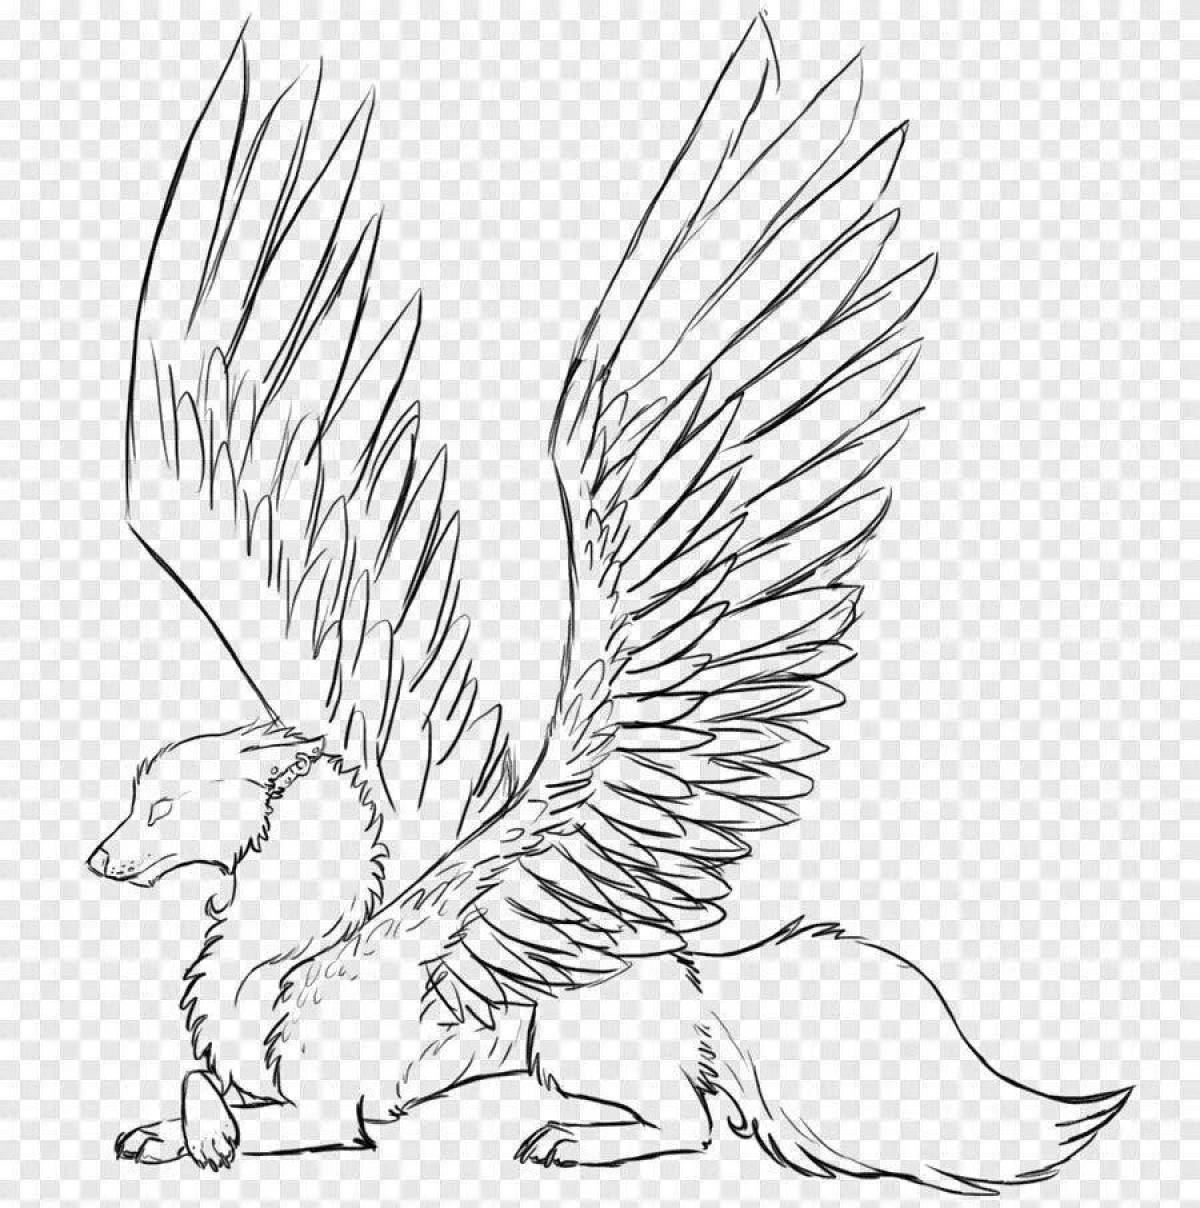 Major coloring dog with wings